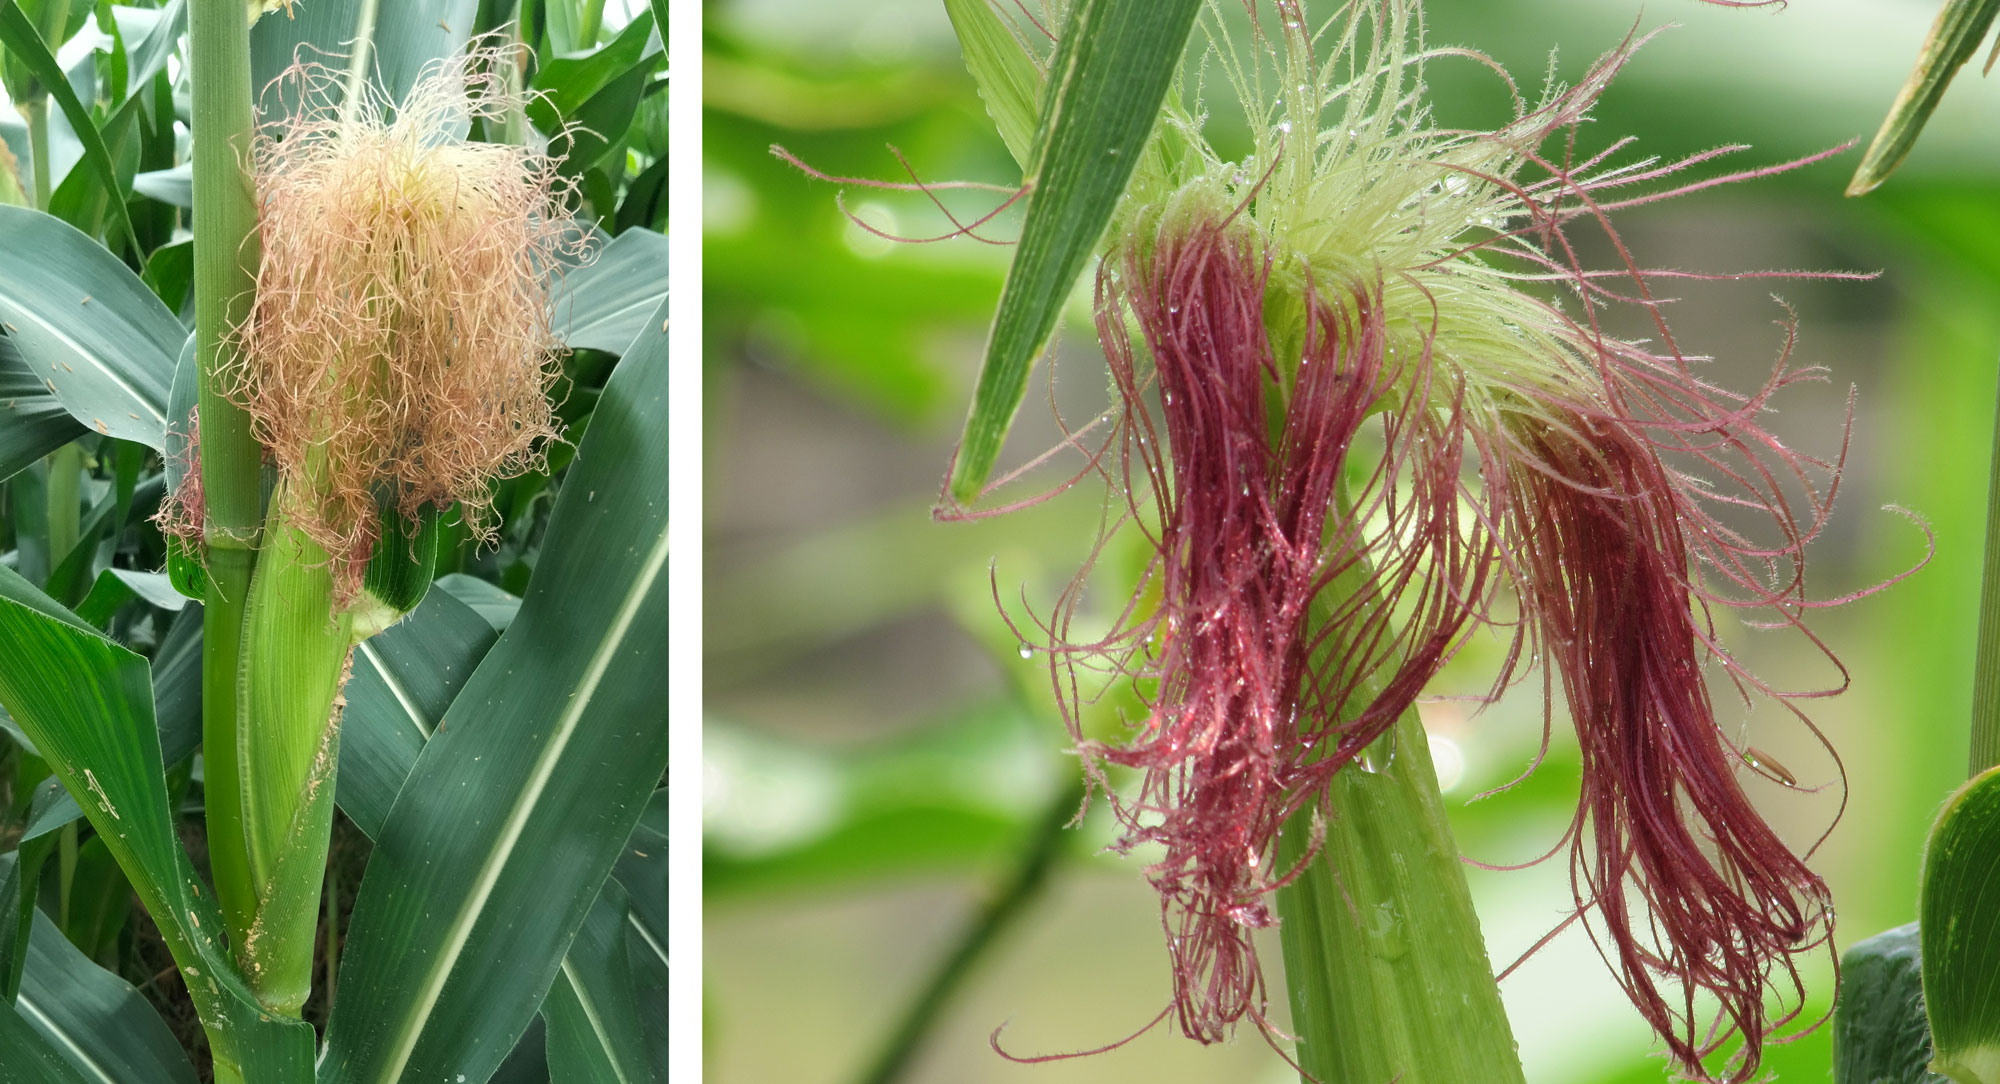 2-panel figure showing photographs of stigmas or silks on corn ears. Panel 1: Portion of a maize stalk with a corn ear that has stigmas sticking out of its tip. The silks are yellow and pinkish. Panel 2: Detail of the silks of a corn ear that are green at the base and deep red at the tips.